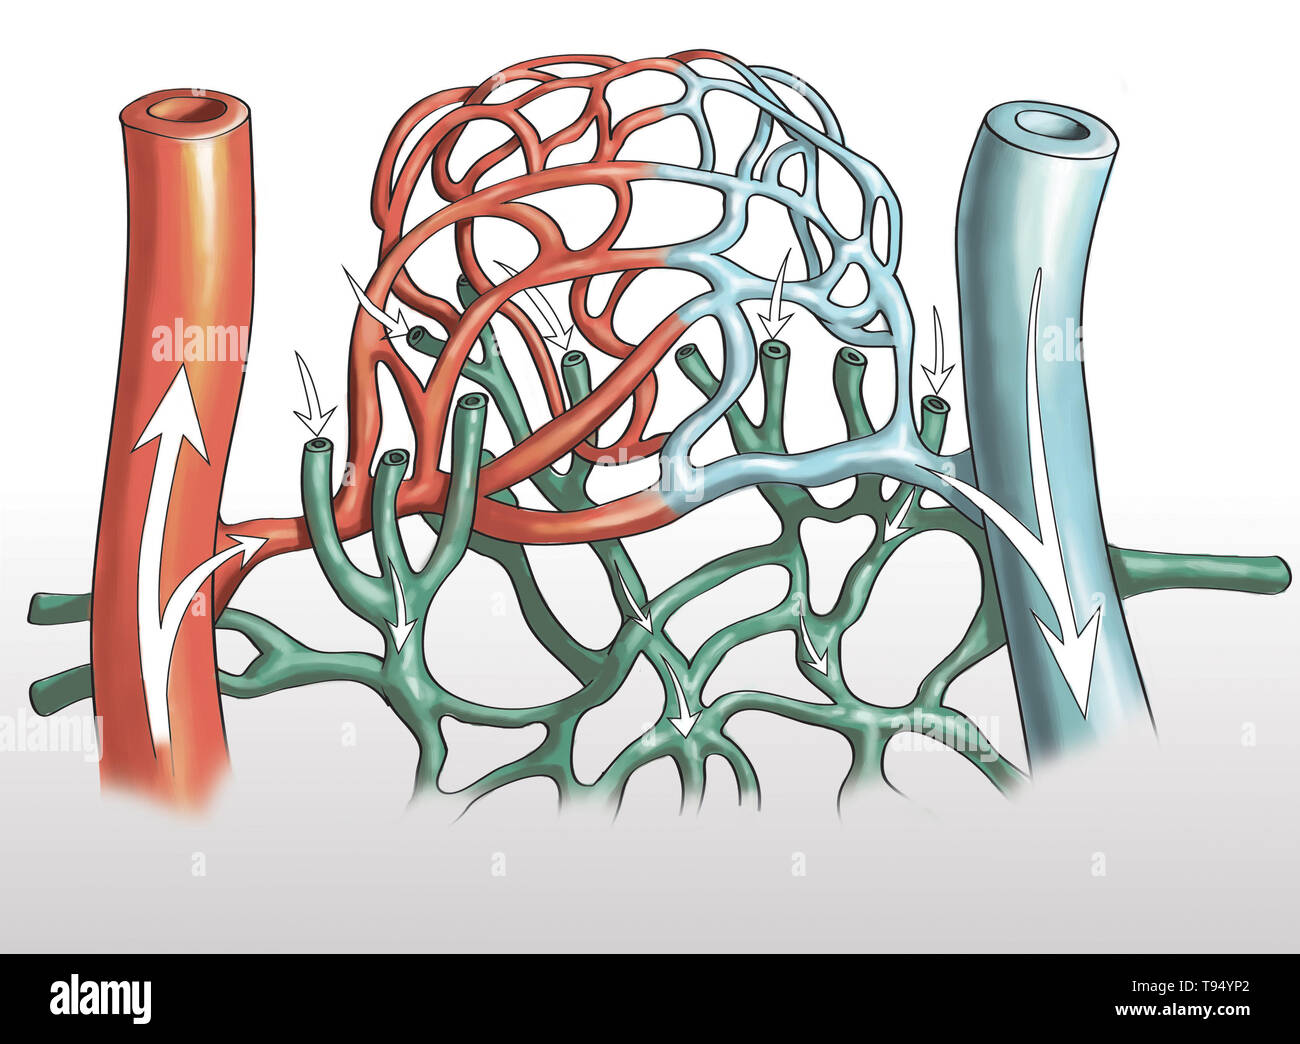 Illustration of blood vessels, artery and capillary networks in leg. Stock Photo